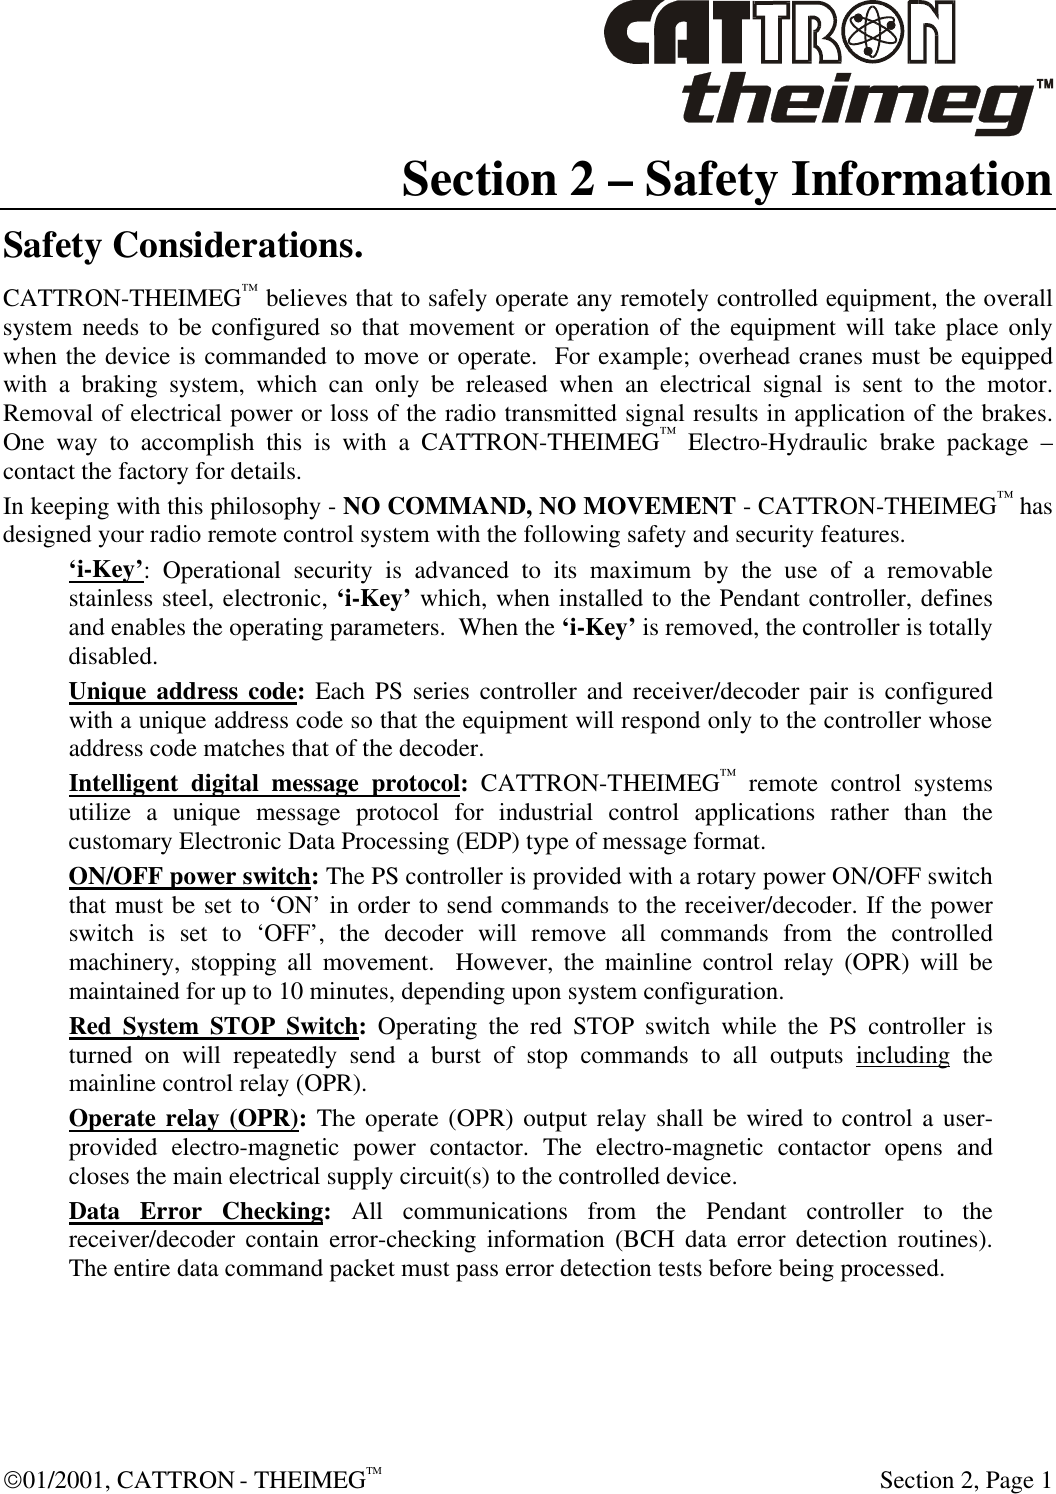  01/2001, CATTRON - THEIMEGTM  Section 2, Page 1 Section 2 – Safety Information Safety Considerations. CATTRON-THEIMEG™ believes that to safely operate any remotely controlled equipment, the overall system needs to be configured so that movement or operation of the equipment will take place only when the device is commanded to move or operate.  For example; overhead cranes must be equipped with a braking system, which can only be released when an electrical signal is sent to the motor.  Removal of electrical power or loss of the radio transmitted signal results in application of the brakes.  One way to accomplish this is with a CATTRON-THEIMEG™ Electro-Hydraulic brake package – contact the factory for details. In keeping with this philosophy - NO COMMAND, NO MOVEMENT - CATTRON-THEIMEG™ has designed your radio remote control system with the following safety and security features.  ‘i-Key’: Operational security is advanced to its maximum by the use of a removable stainless steel, electronic, ‘i-Key’ which, when installed to the Pendant controller, defines and enables the operating parameters.  When the ‘i-Key’ is removed, the controller is totally disabled.  Unique address code: Each PS series controller and receiver/decoder pair is configured with a unique address code so that the equipment will respond only to the controller whose address code matches that of the decoder. Intelligent digital message protocol: CATTRON-THEIMEG™ remote control systems utilize a unique message protocol for industrial control applications rather than the customary Electronic Data Processing (EDP) type of message format. ON/OFF power switch: The PS controller is provided with a rotary power ON/OFF switch that must be set to ‘ON’ in order to send commands to the receiver/decoder. If the power switch is set to ‘OFF’, the decoder will remove all commands from the controlled machinery, stopping all movement.  However, the mainline control relay (OPR) will be maintained for up to 10 minutes, depending upon system configuration. Red System STOP Switch: Operating the red STOP switch while the PS controller is turned on will repeatedly send a burst of stop commands to all outputs including the mainline control relay (OPR). Operate relay (OPR): The operate (OPR) output relay shall be wired to control a user-provided electro-magnetic power contactor. The electro-magnetic contactor opens and closes the main electrical supply circuit(s) to the controlled device. Data Error Checking: All communications from the Pendant controller to the receiver/decoder contain error-checking information (BCH data error detection routines).  The entire data command packet must pass error detection tests before being processed. 